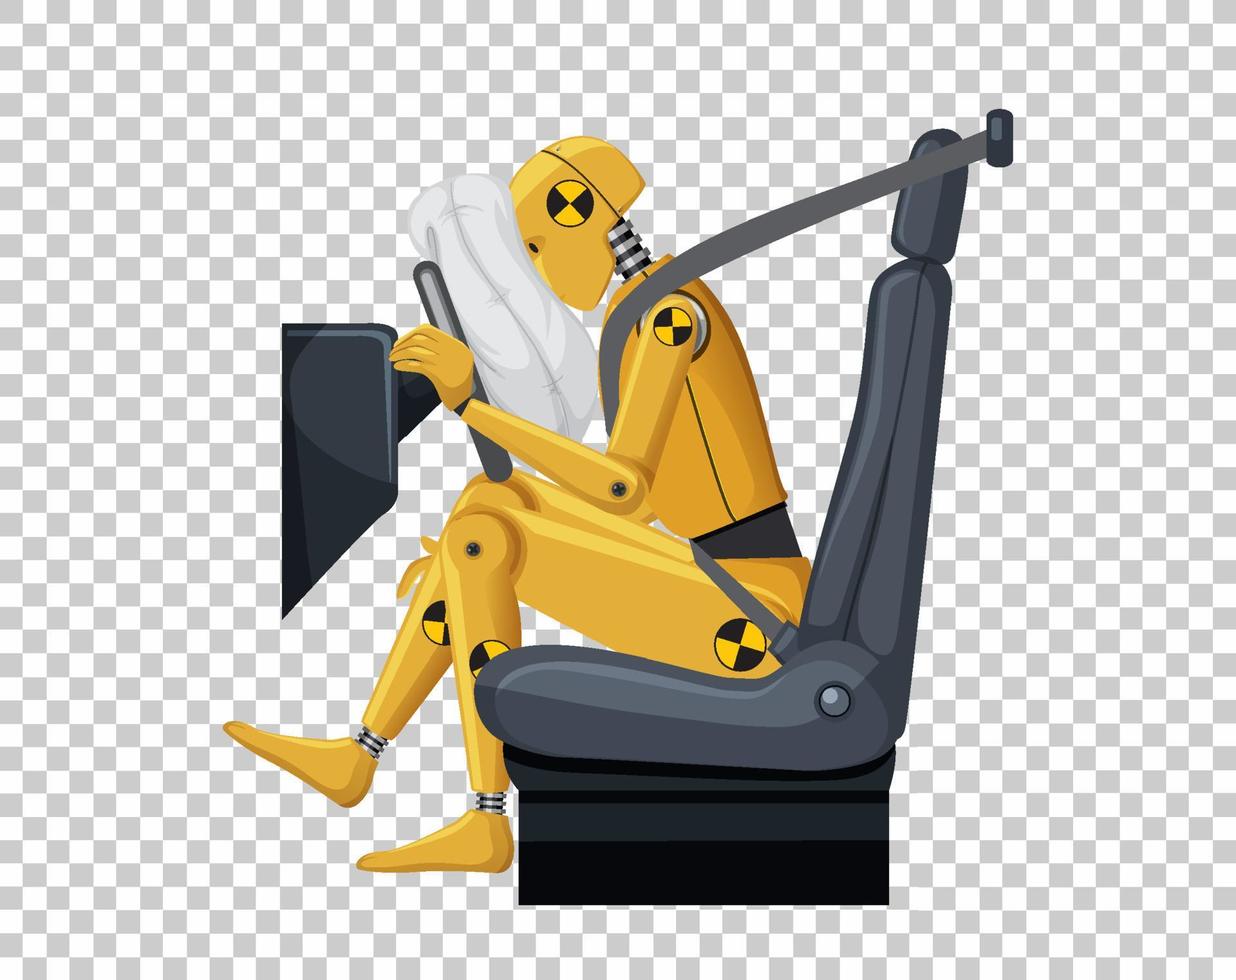 Crash test dummy in a car seat on grid background vector